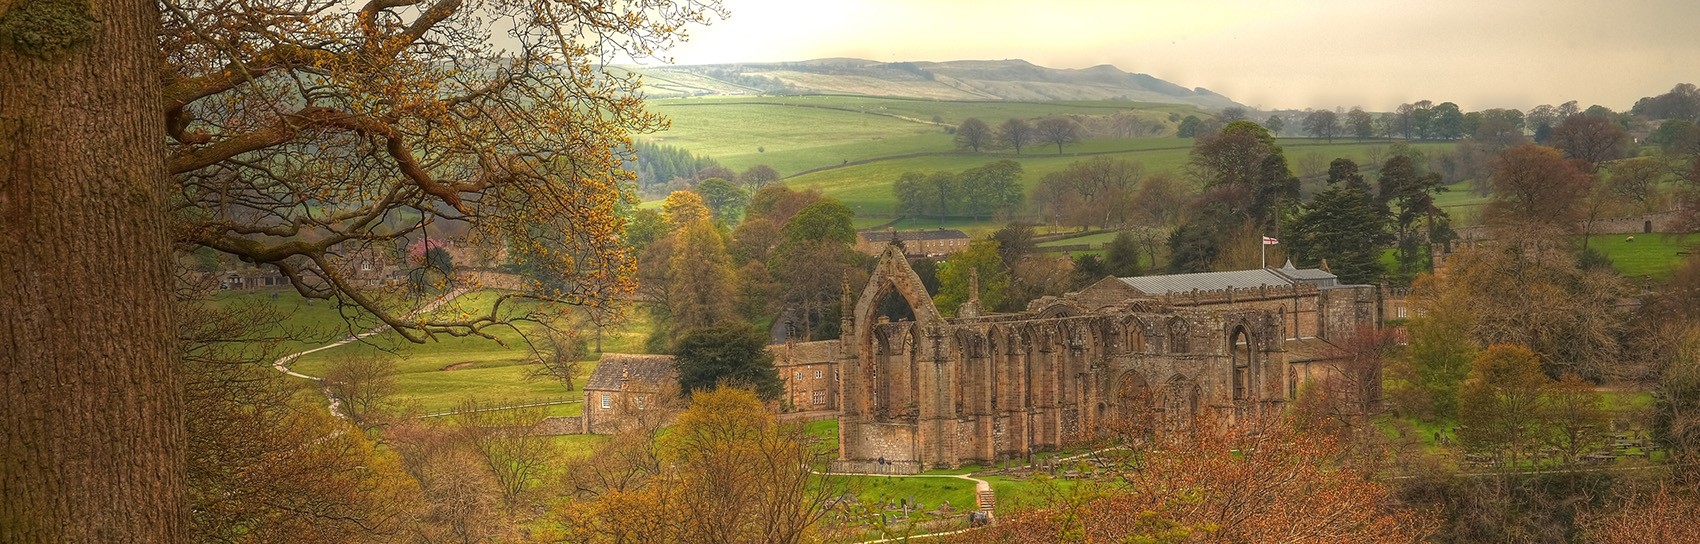 Priory Church on Bolton Abbey Estate. Photograph by ANDRZEJ SOWA